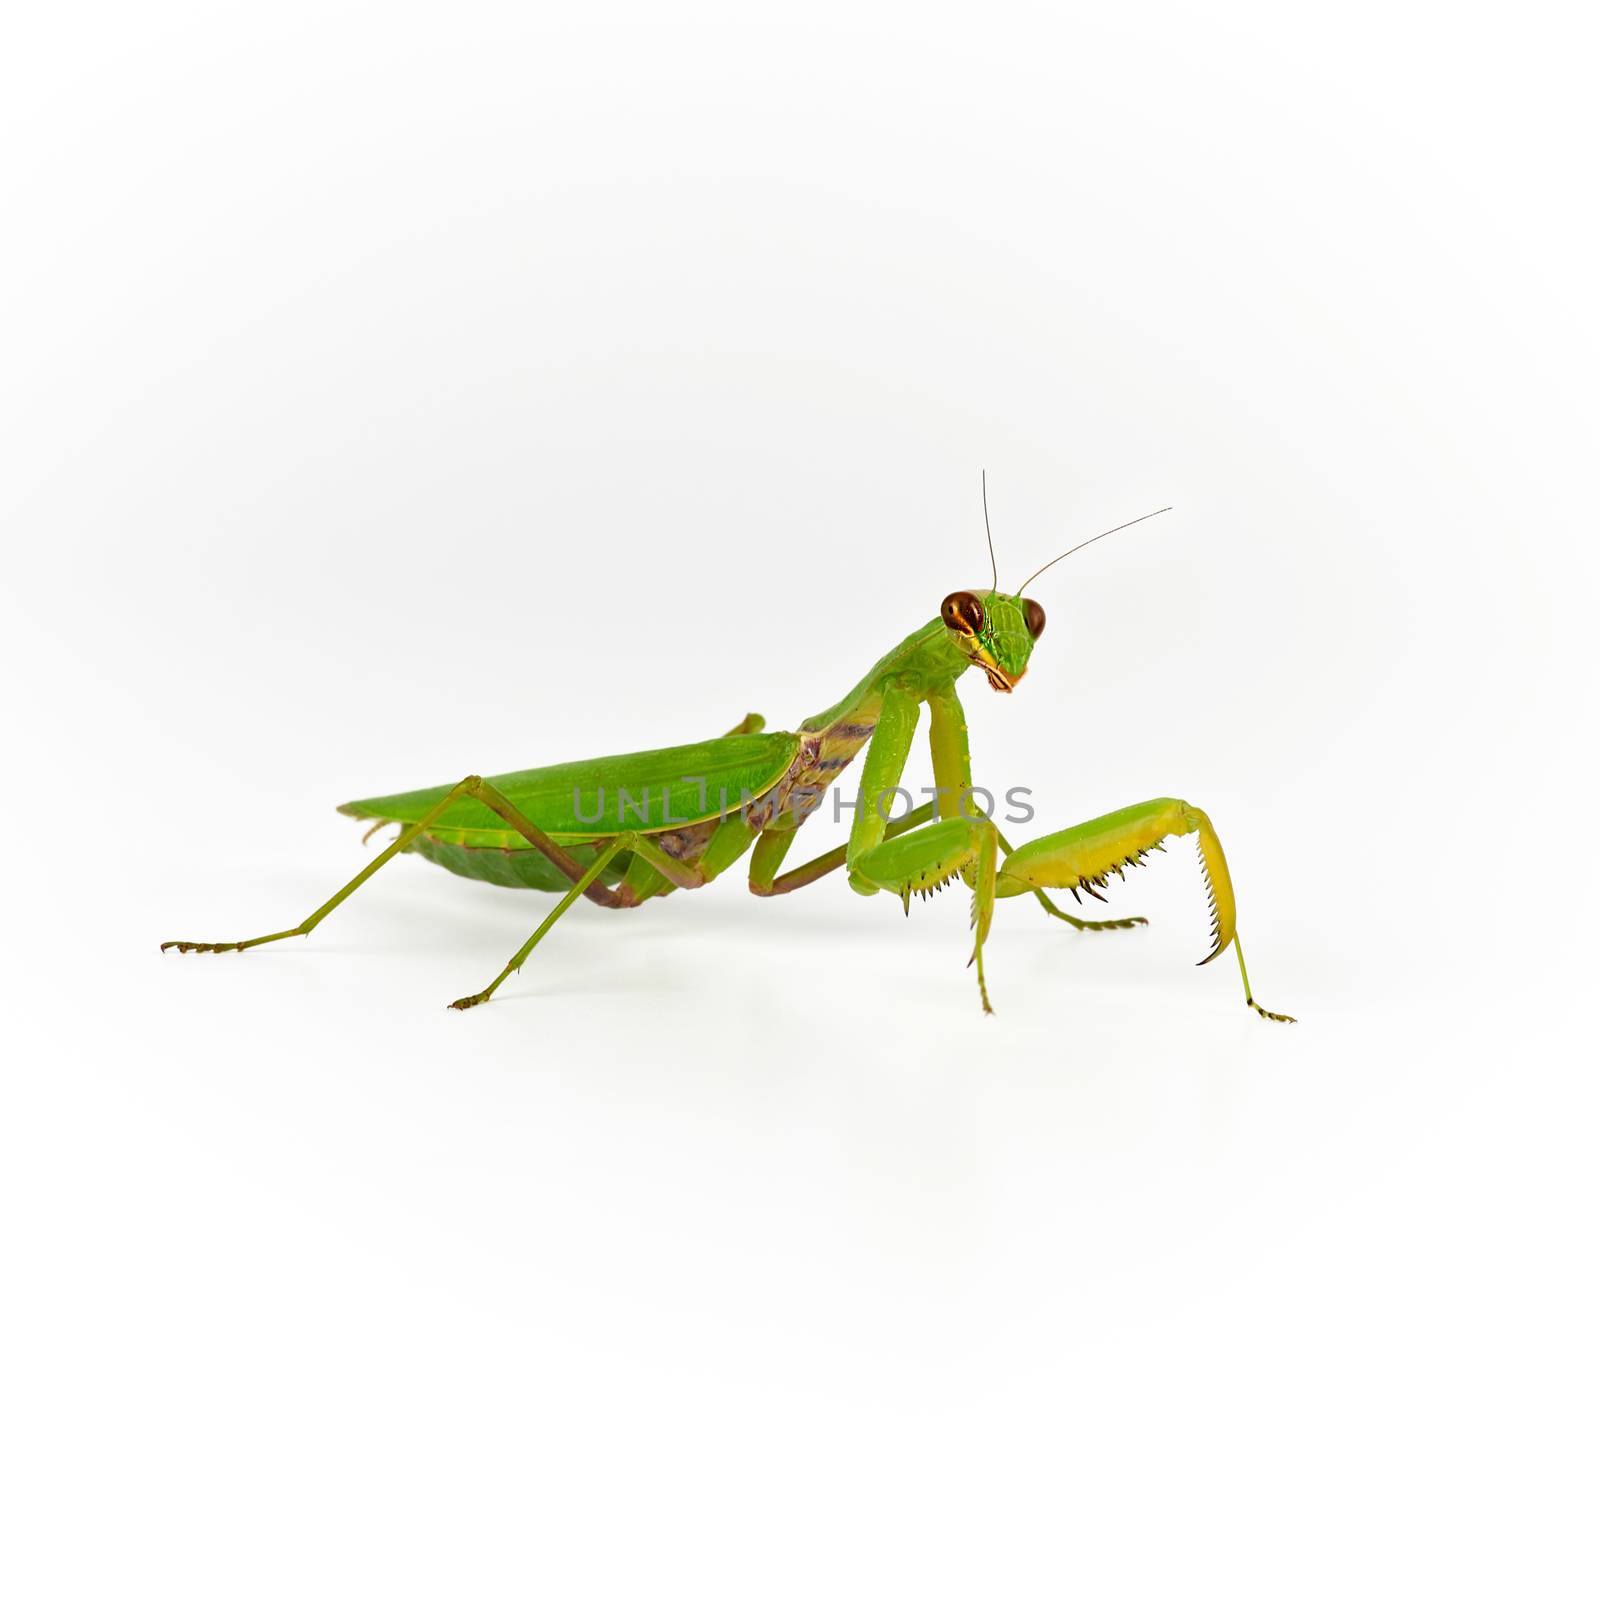  green mantis on a white background looks at the camera, close u by ndanko